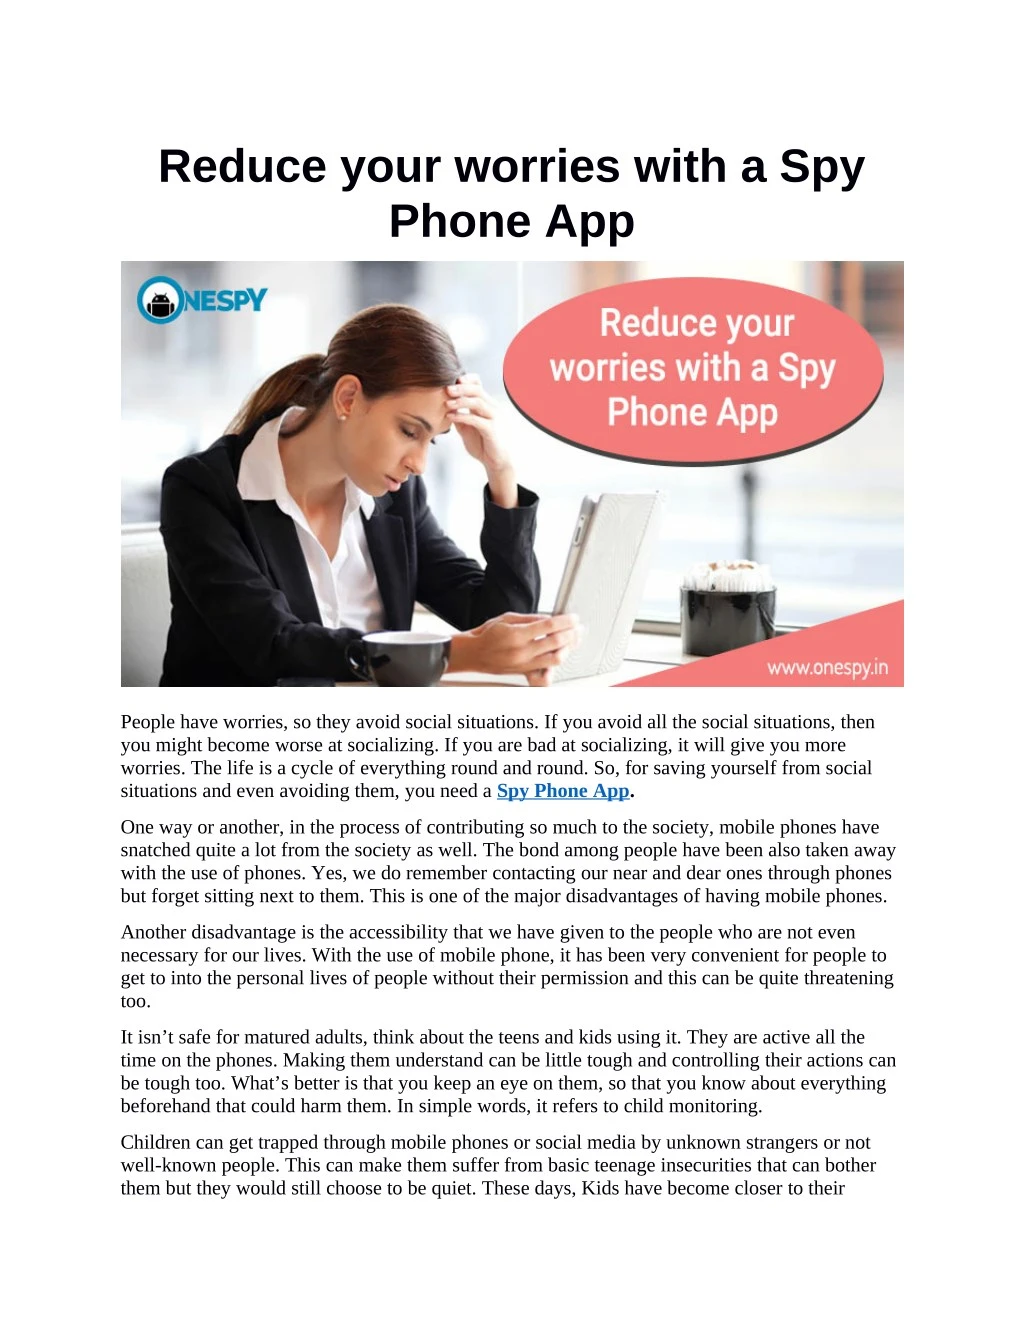 reduce your worries with a spy phone app